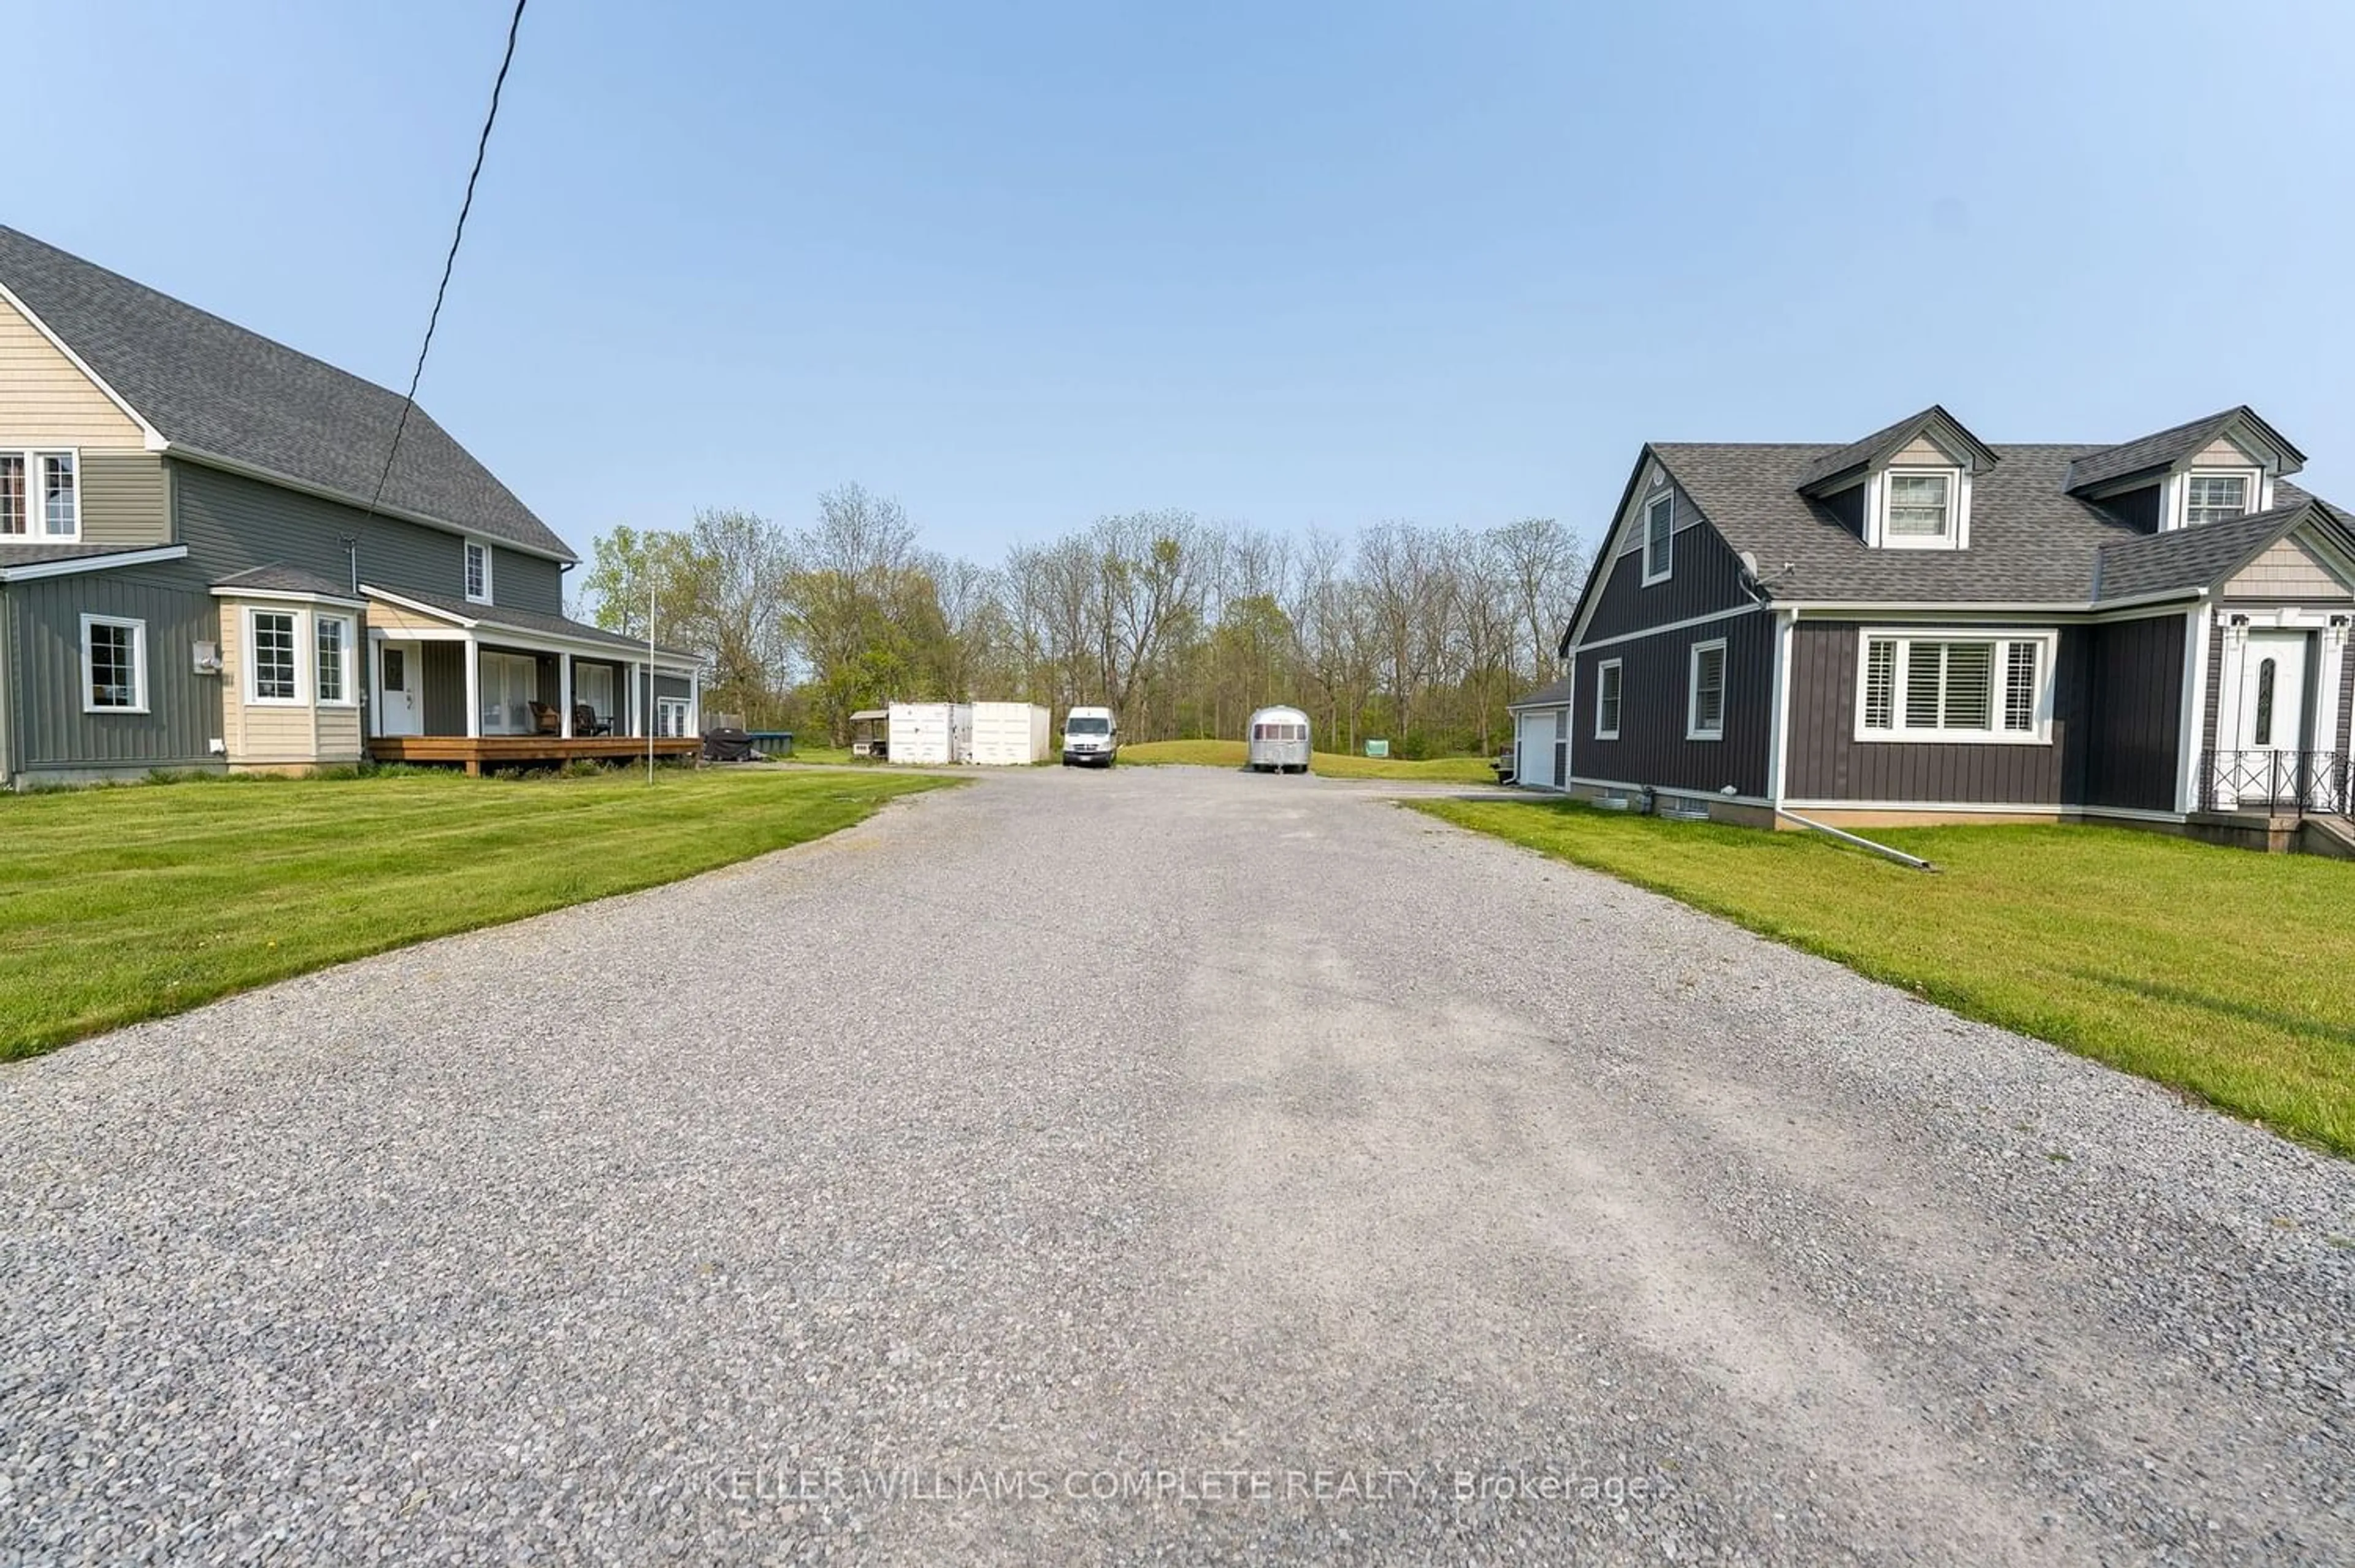 Street view for 560 Rosehill Rd, Fort Erie Ontario L2A 5M4